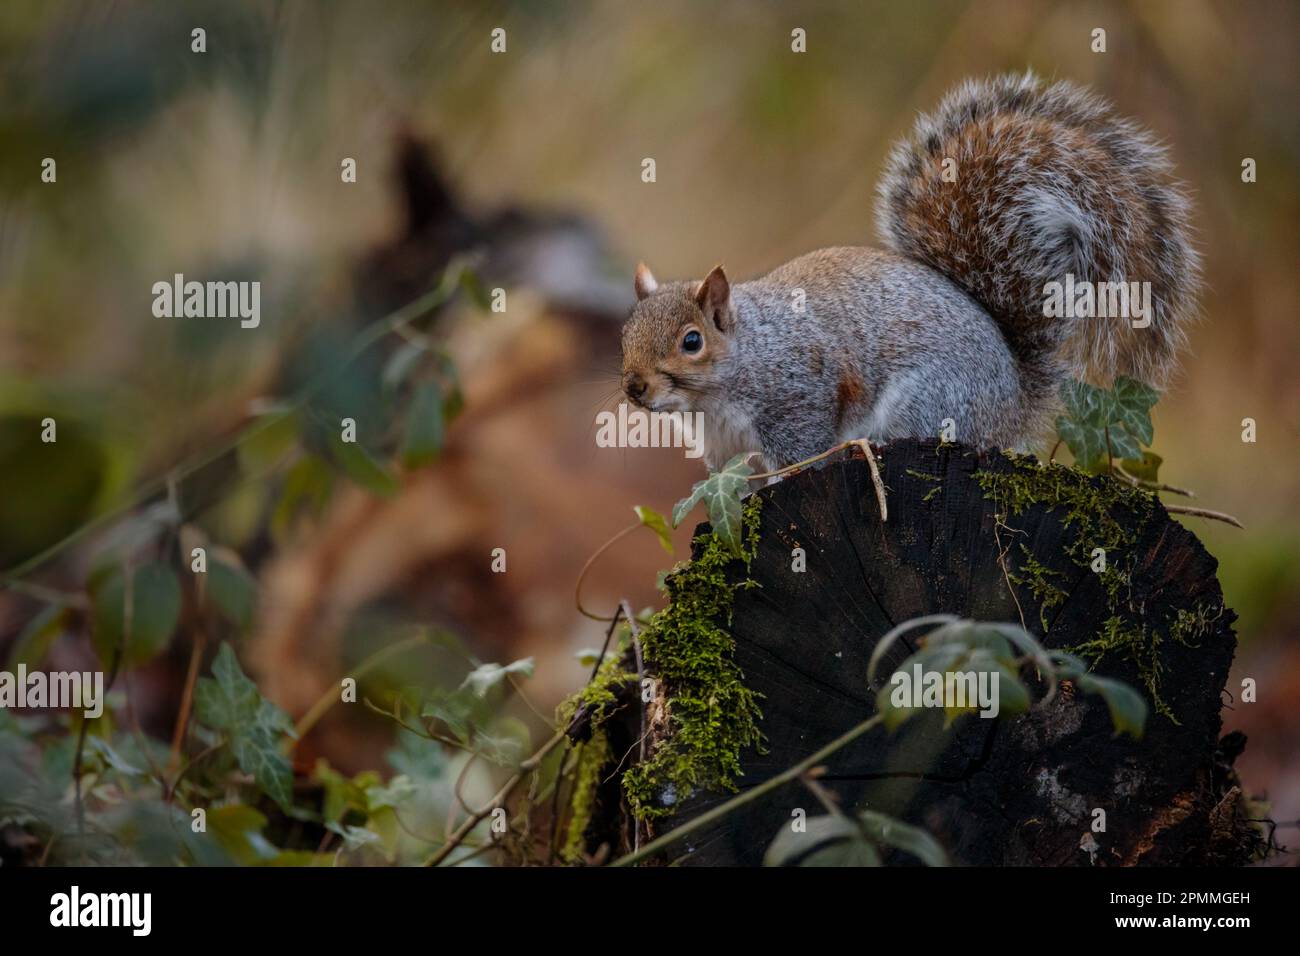 Grey Squirrel, Sciurus Carolinensis, on a moss covered tree stump in the woodlands, Wembley, UK Photo by Amanda Rose/Alamy Stock Photo